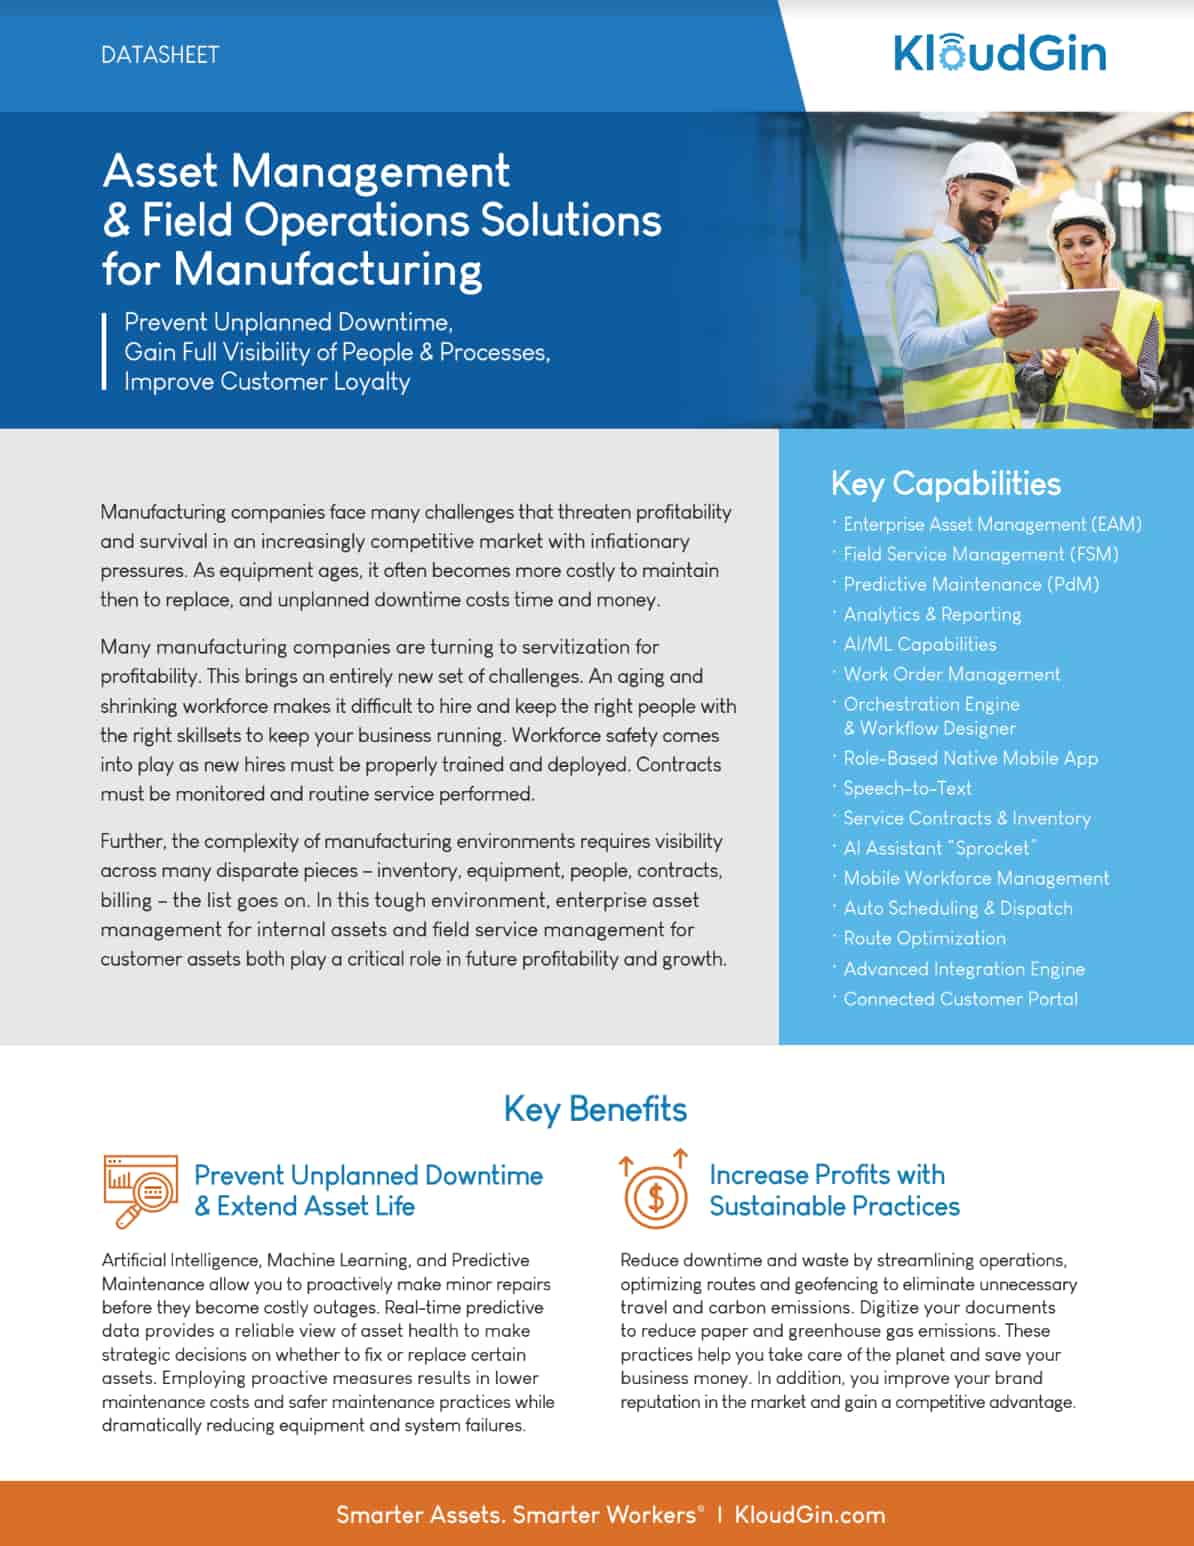 Asset Management and Field operations solutions for manufacturing